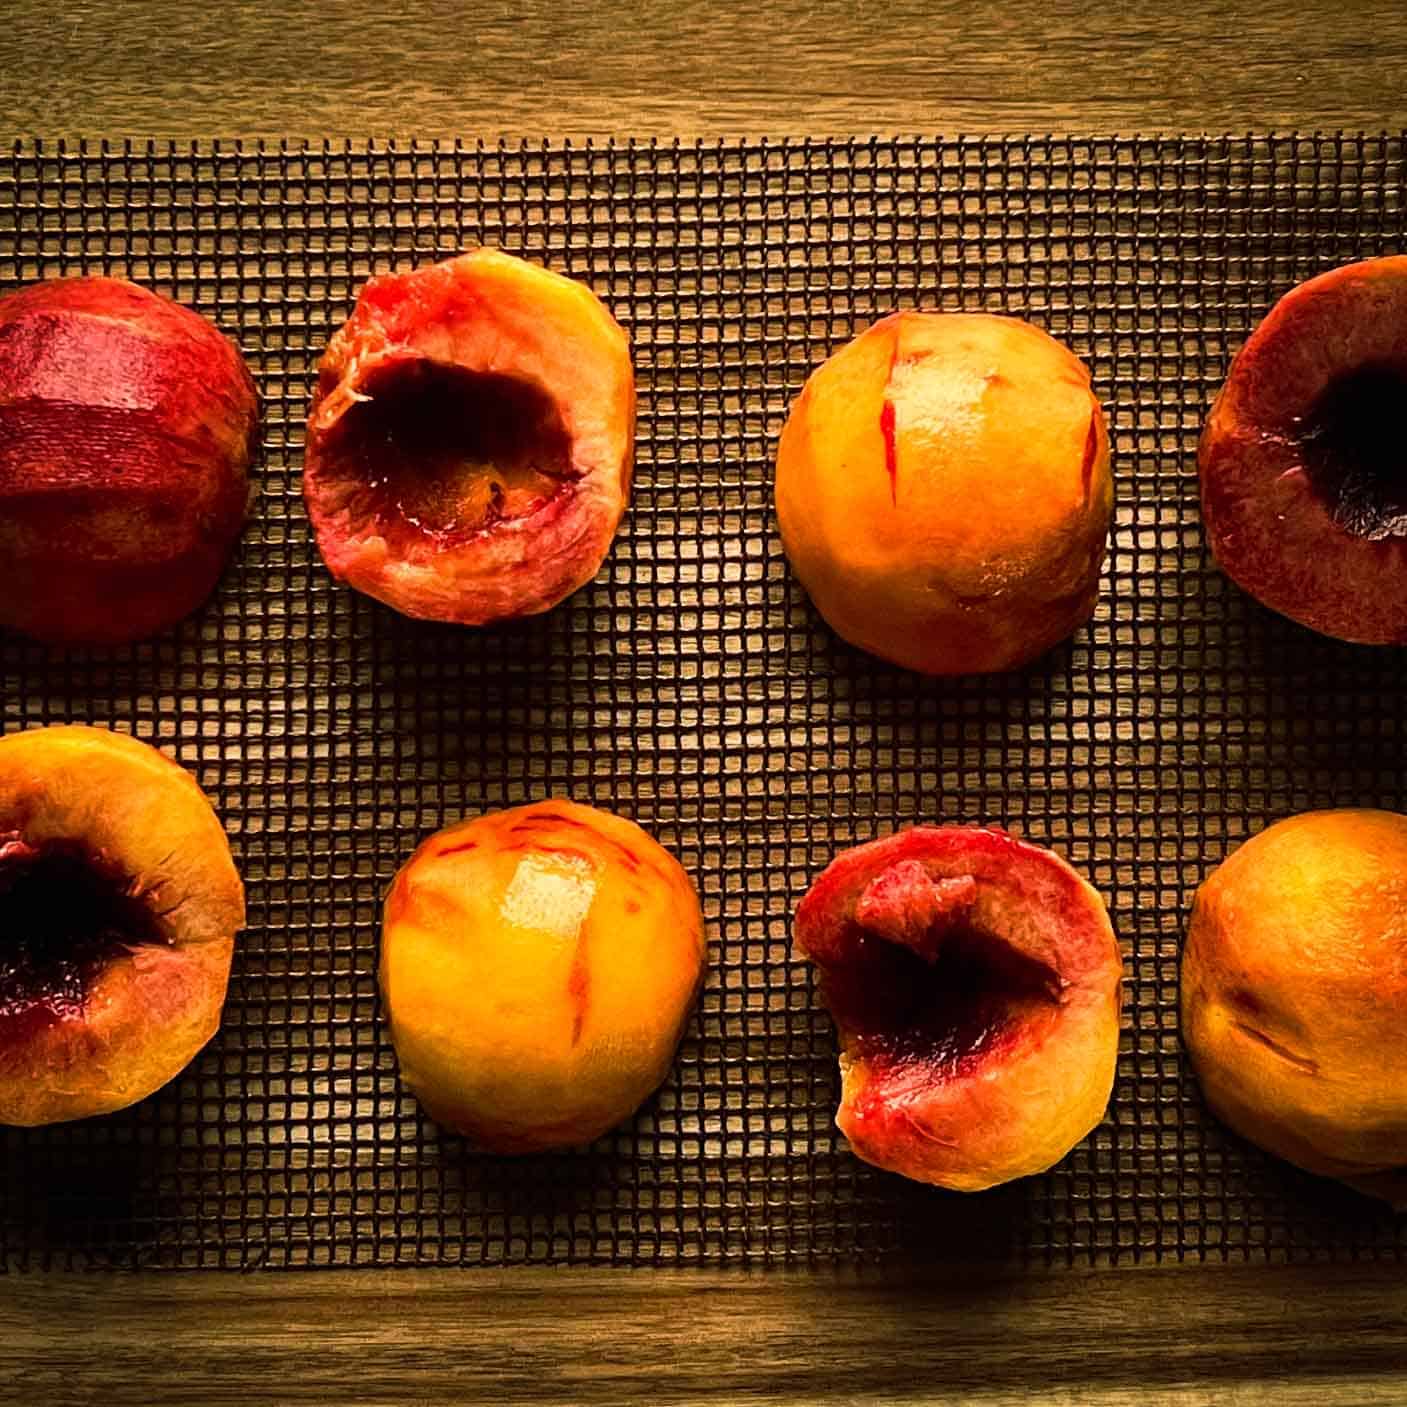 Peaches peeled, halved and placed on a grill mat.